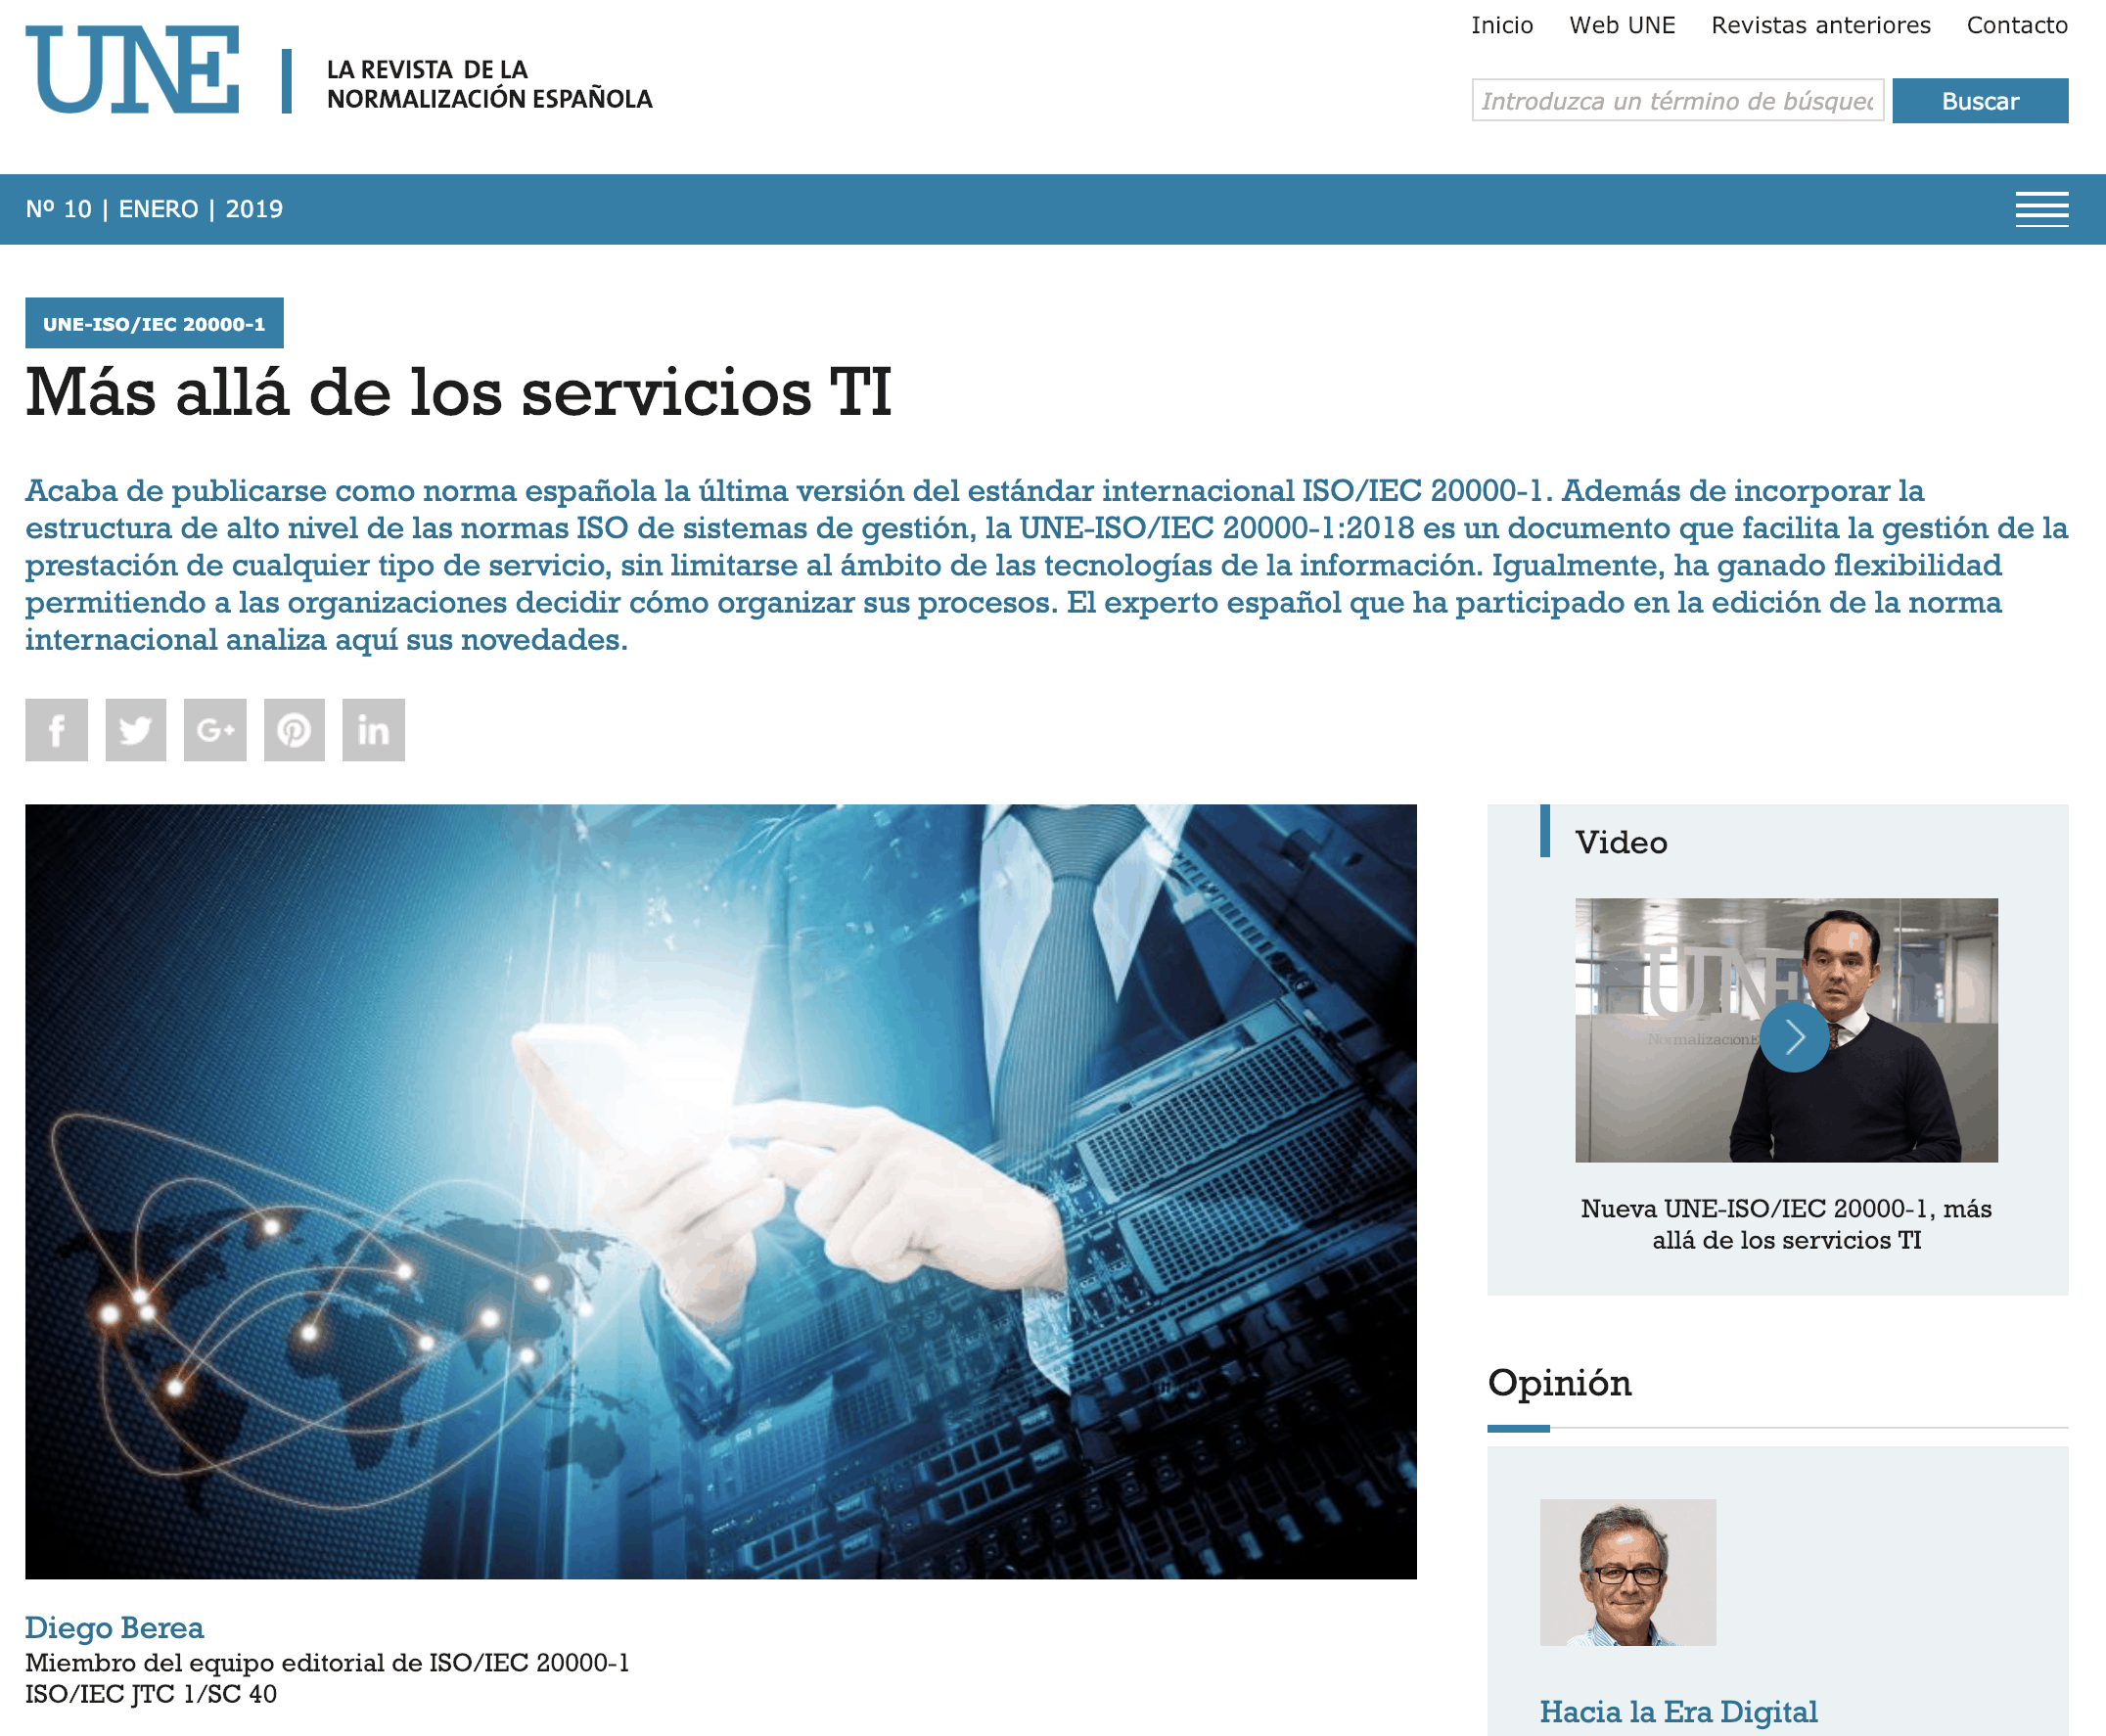 Article by Diego Berea in UNE magazine about ISO/IEC 20000-1:2018 in UNE Magazine